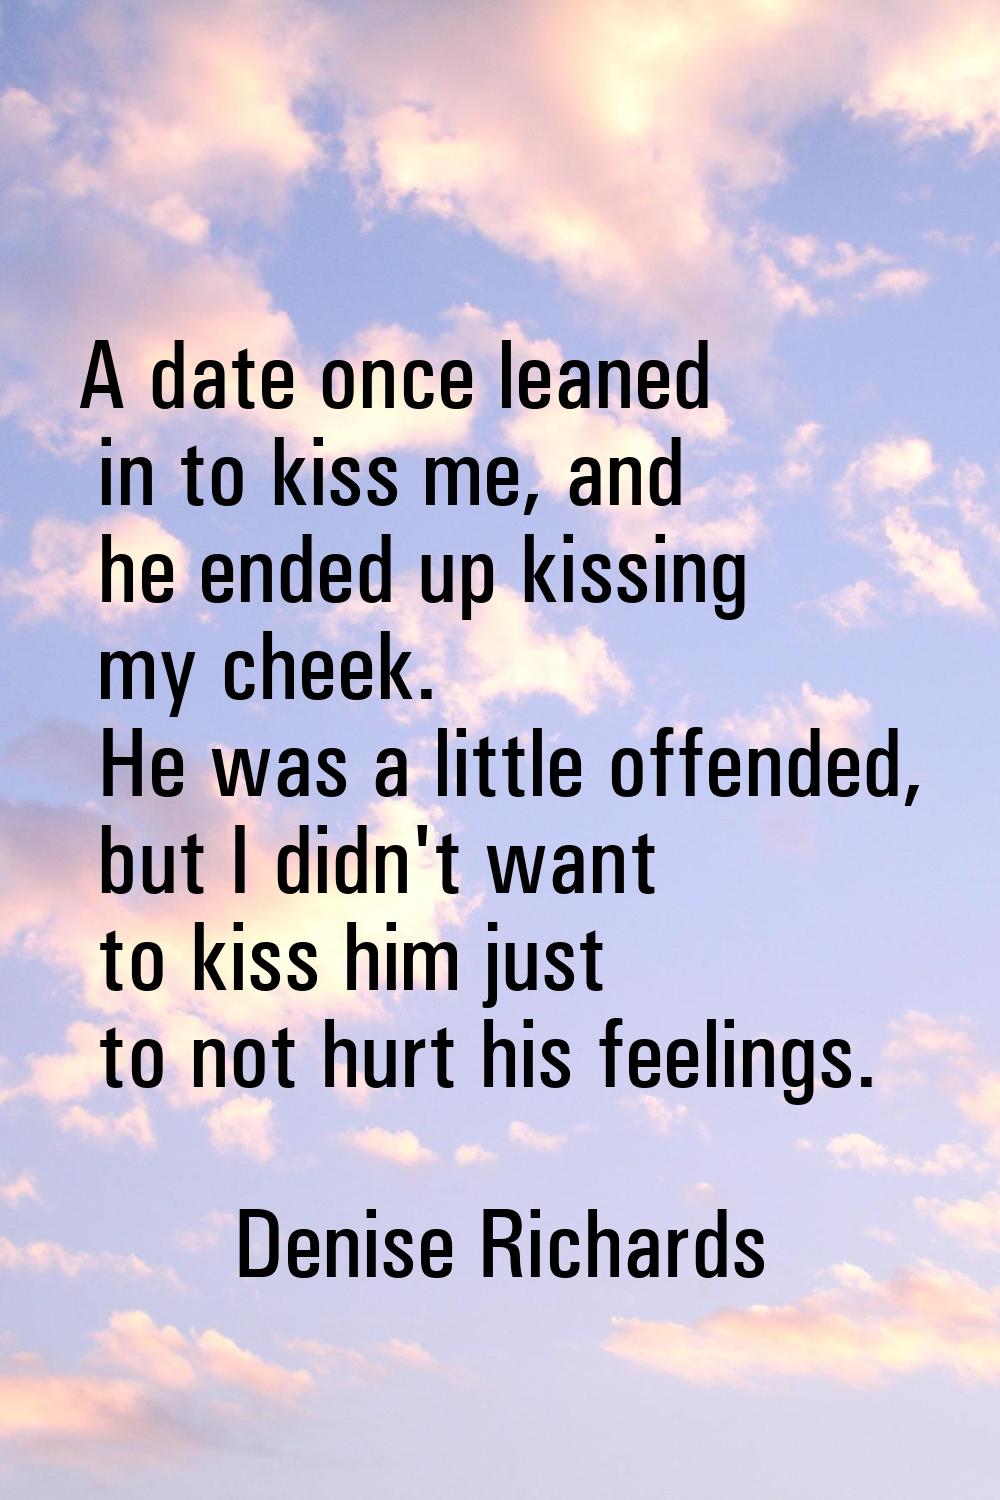 A date once leaned in to kiss me, and he ended up kissing my cheek. He was a little offended, but I